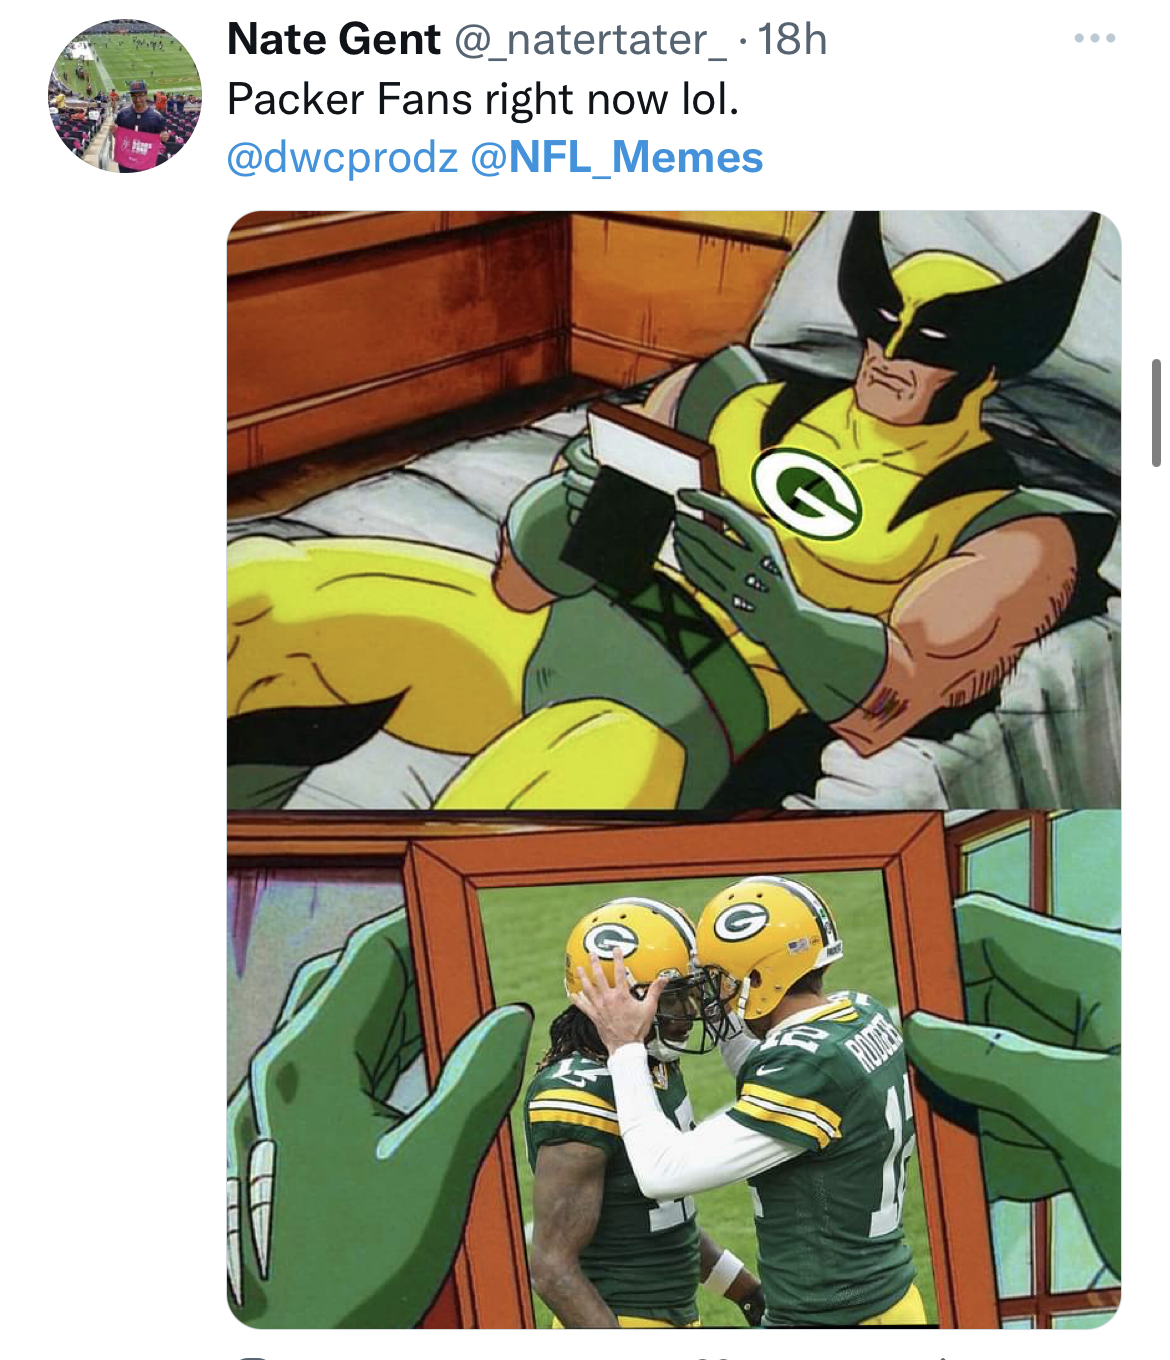 NFL memes week 1 2022 - wolverine and akuma best friends - Nate Gent .18h Packer Fans right now lol. C Q